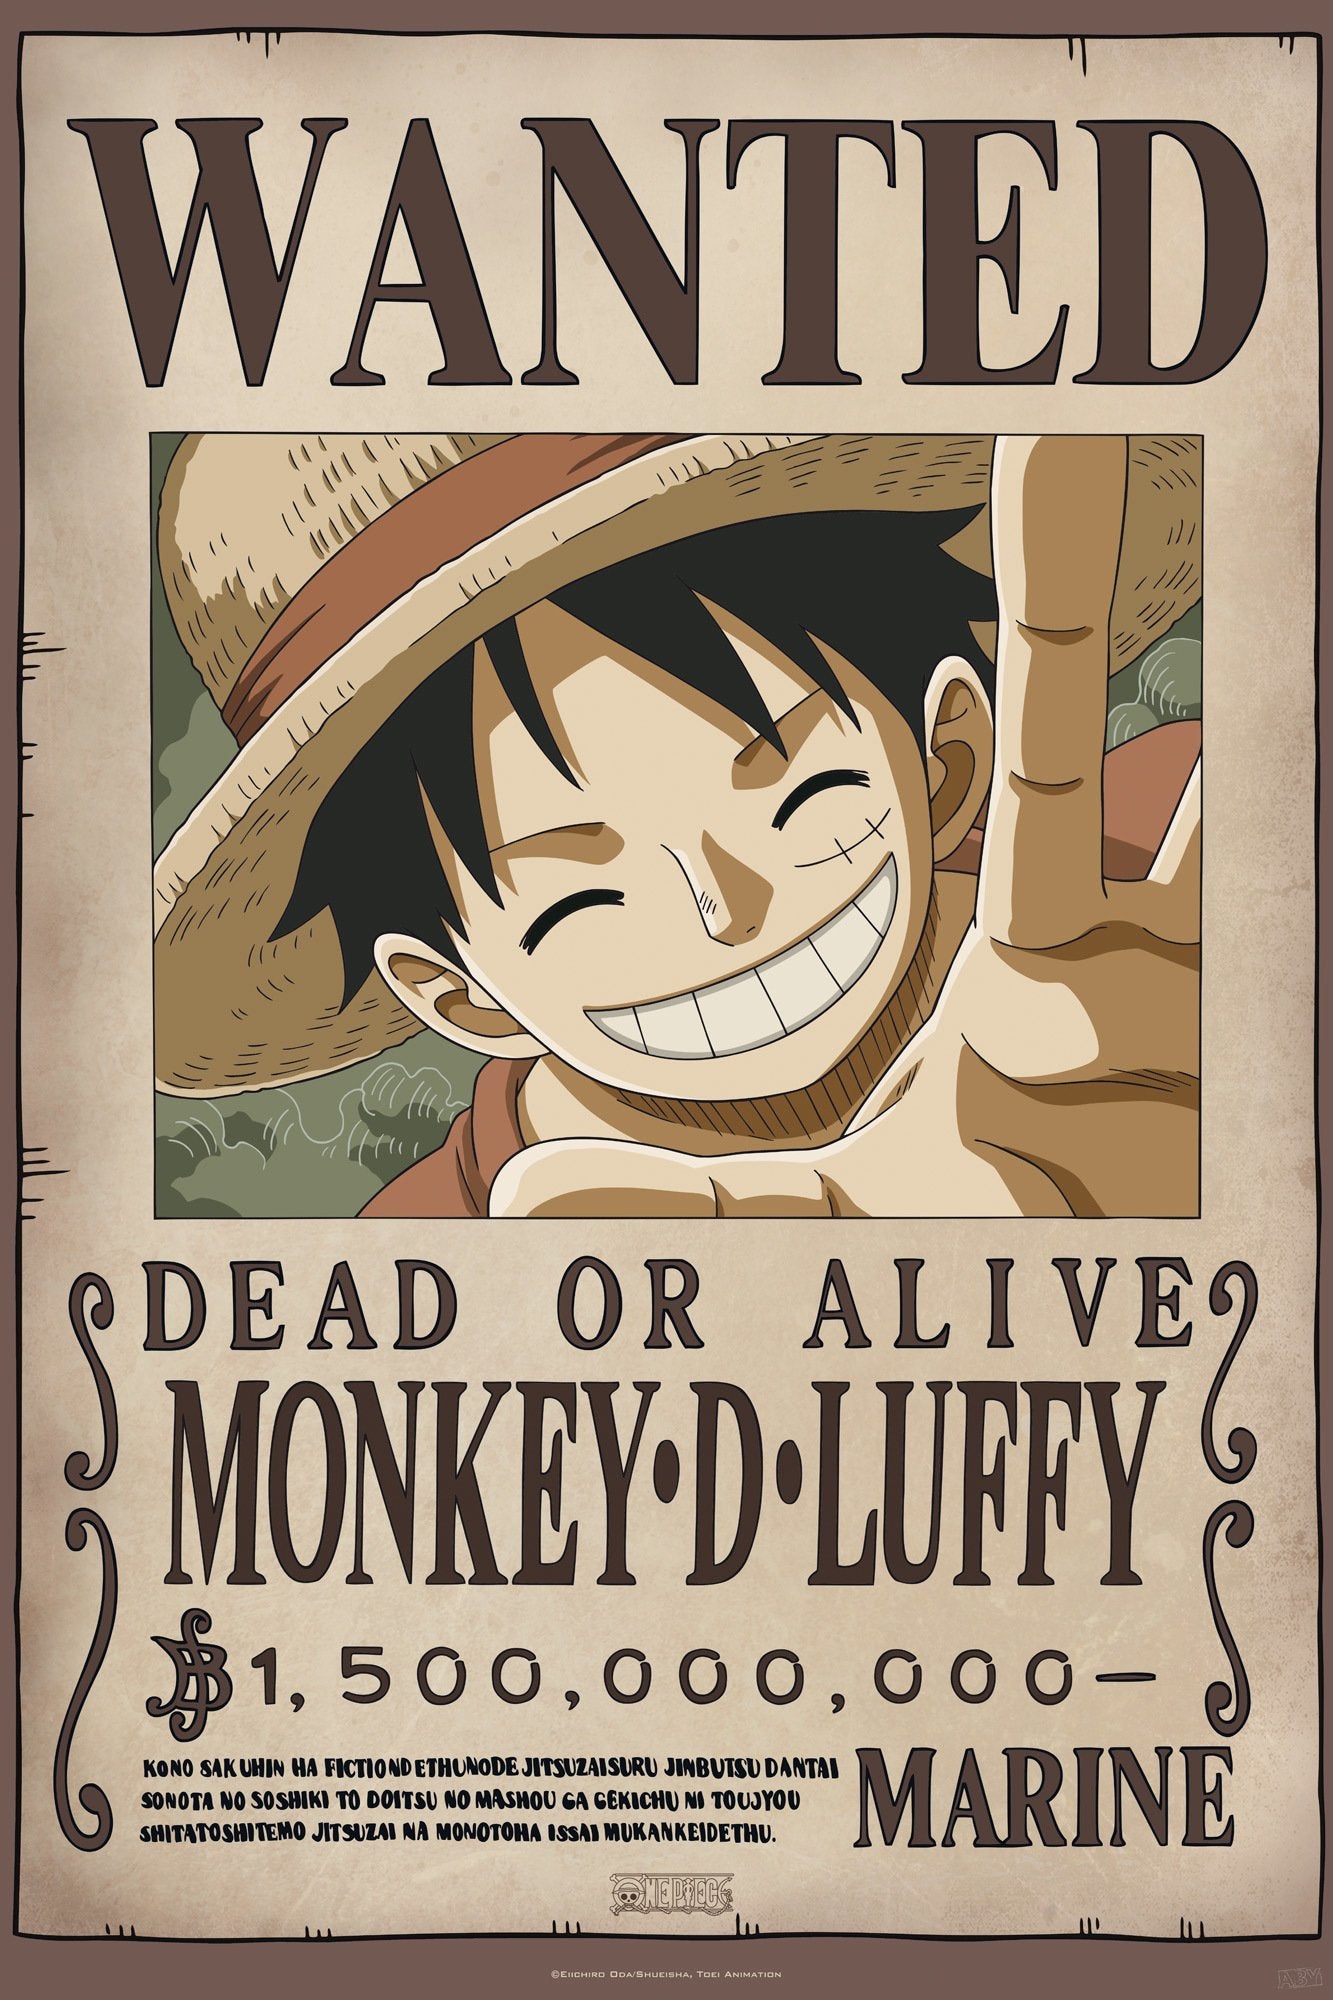 One Piece (Monkey D Luffy) Poster